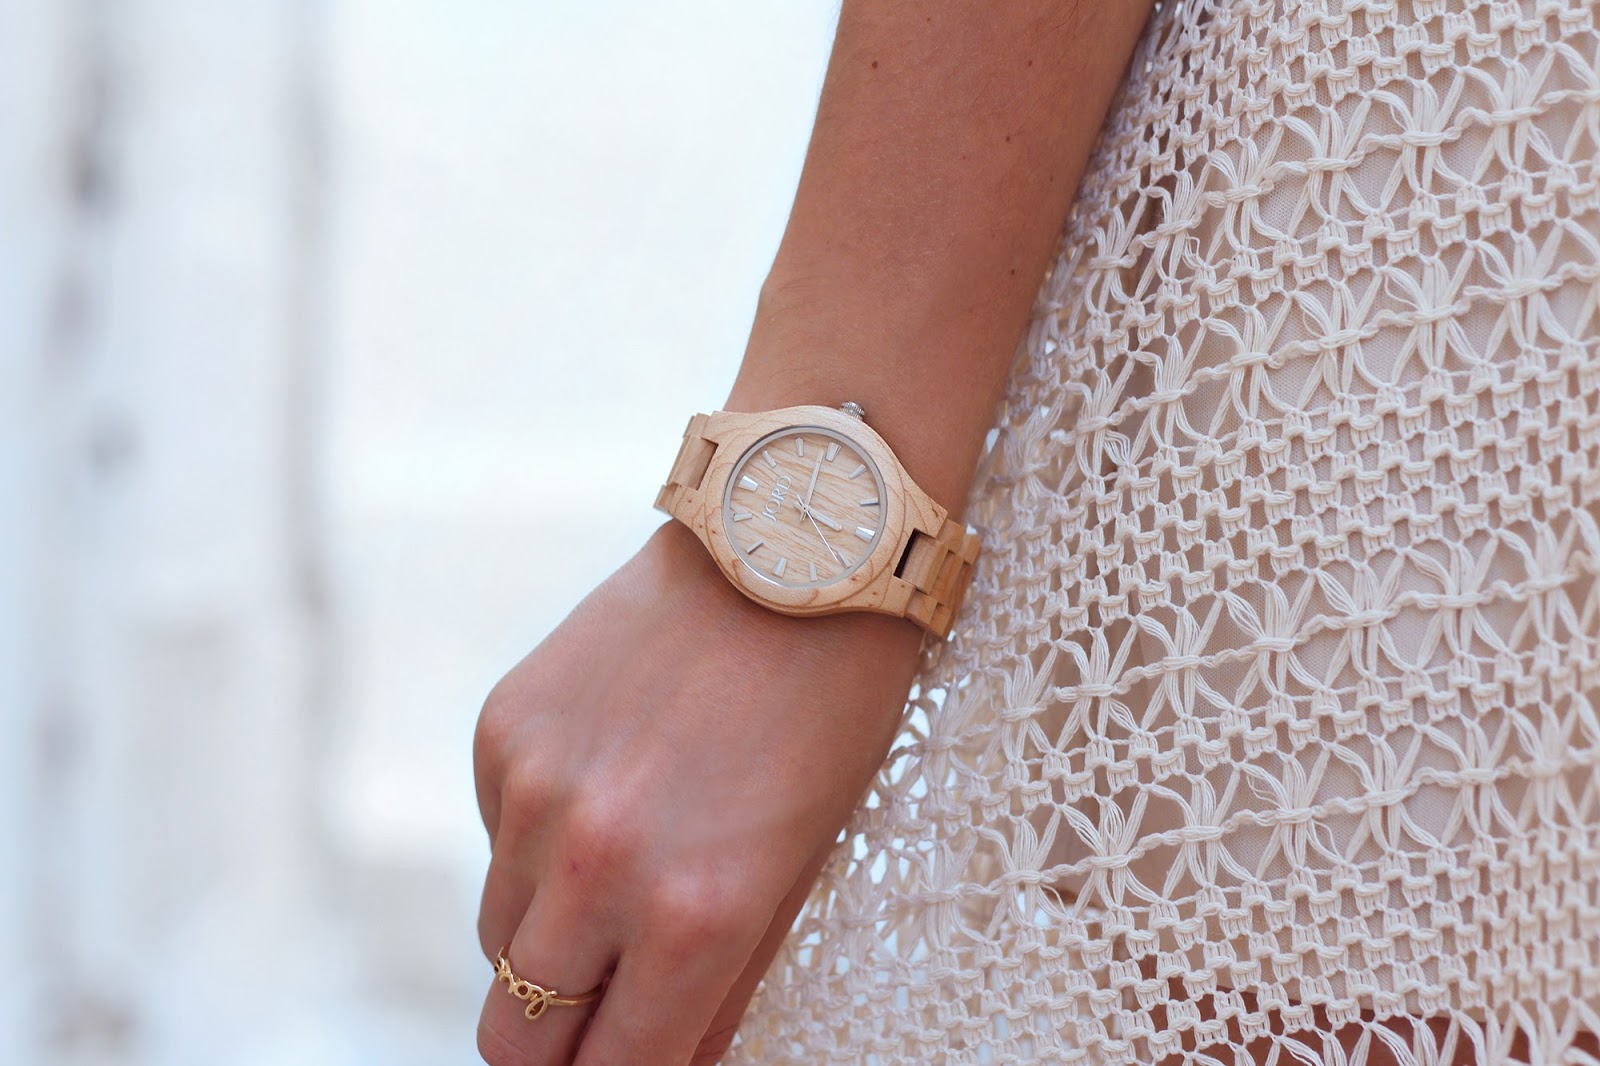 fashion style blogger outfit ootd italian girl italy trend vogue glamour pescara garage indy chic boho lace fringes bijou brigitte zara hm jord wood watches midi knuckle rings